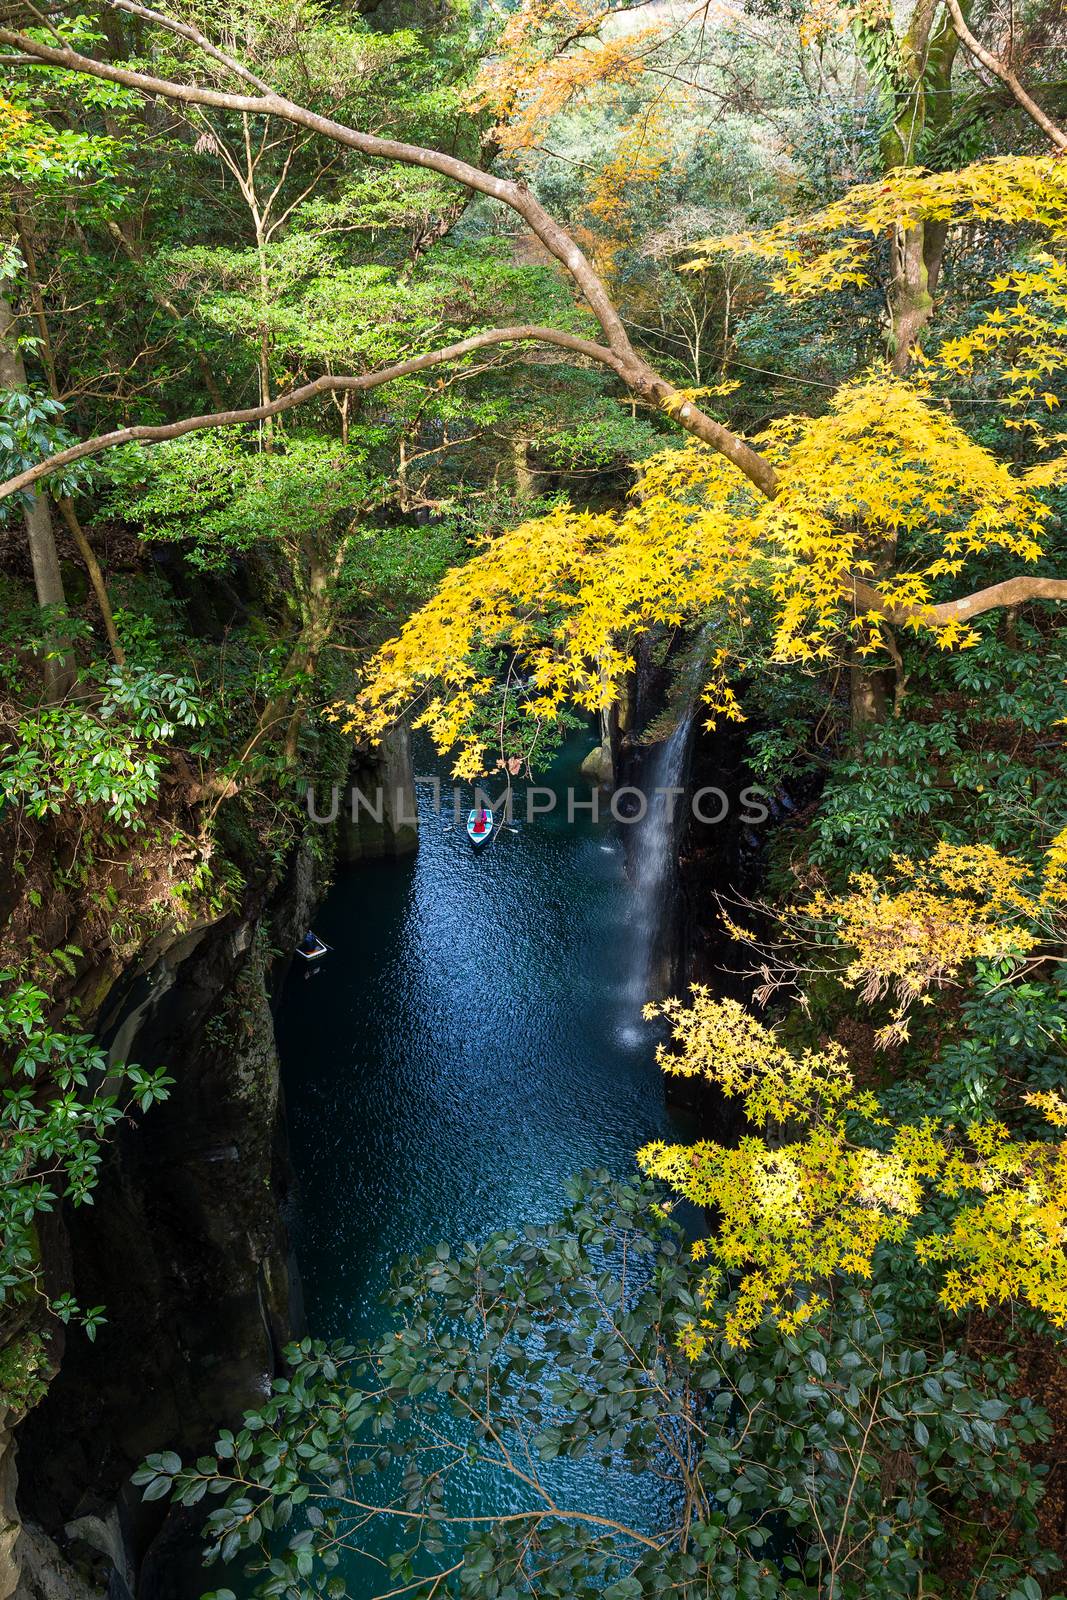 Autumn Takachiho gorge in Japan